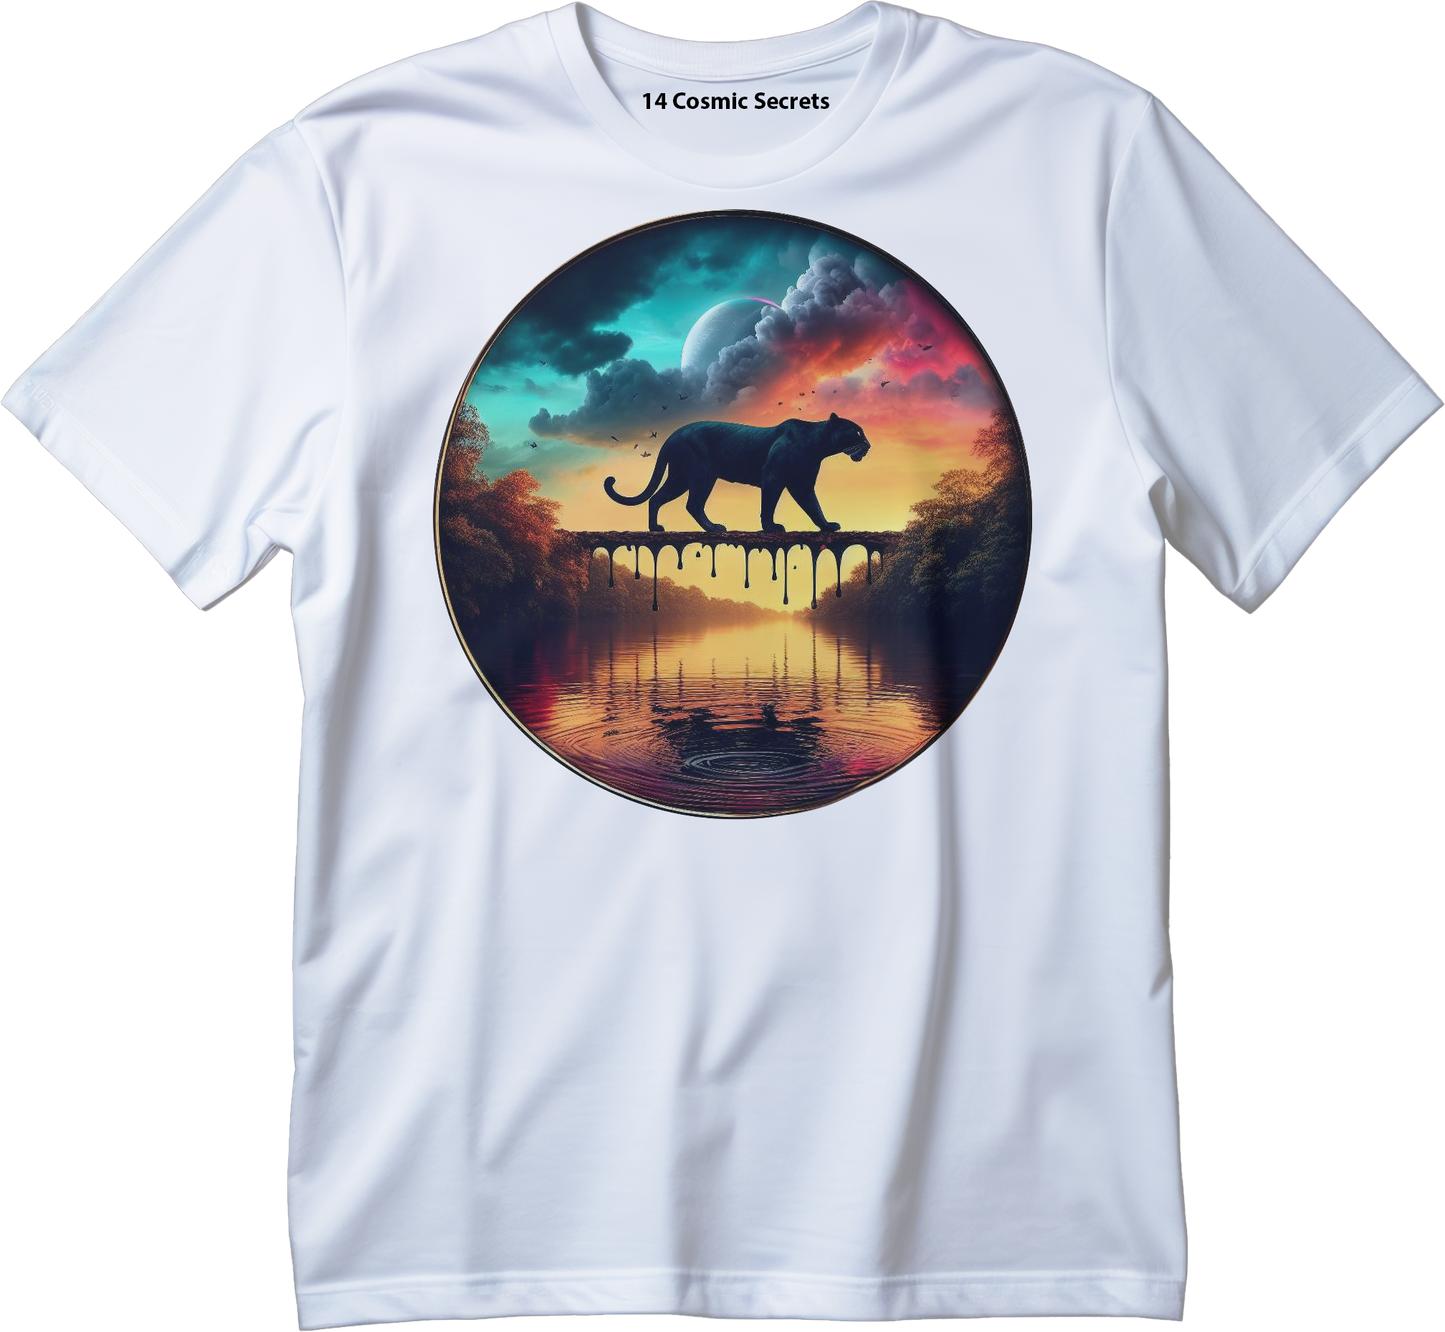 In Search of Prey Graphic Printed T-Shirt  Cotton T-Shirt Magnificence of India T-Shirt